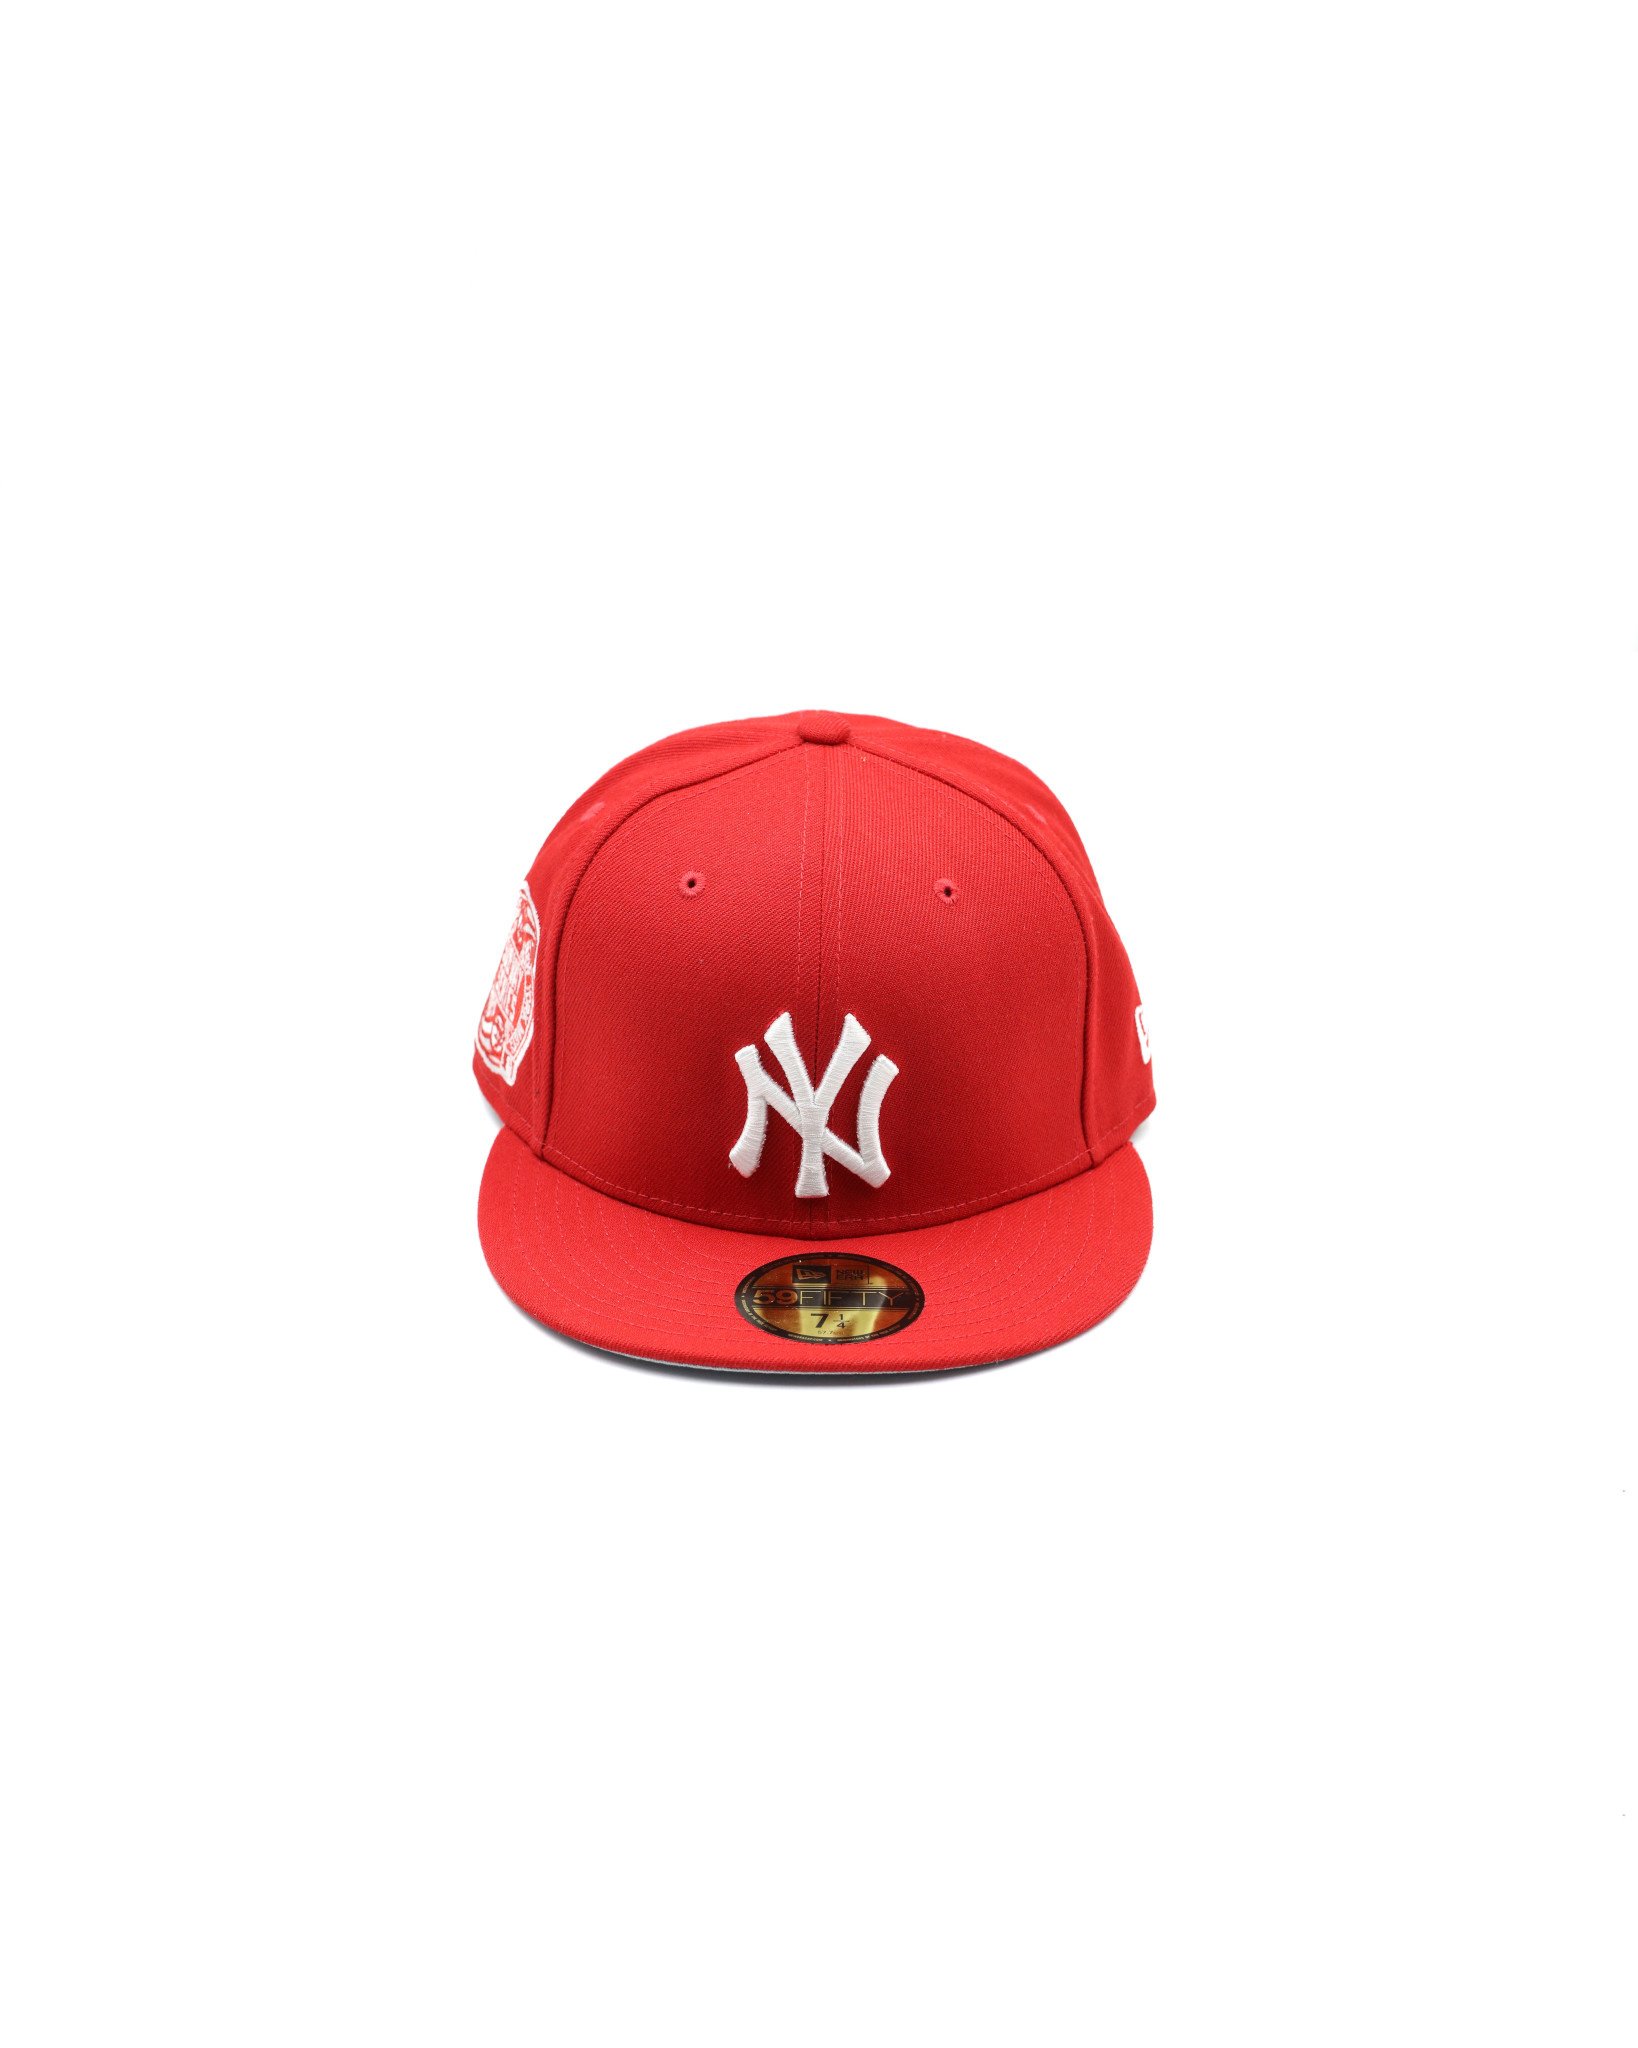 Swarovski Crystal Red NY Yankees Subway Series Patch New Era Fitted 8